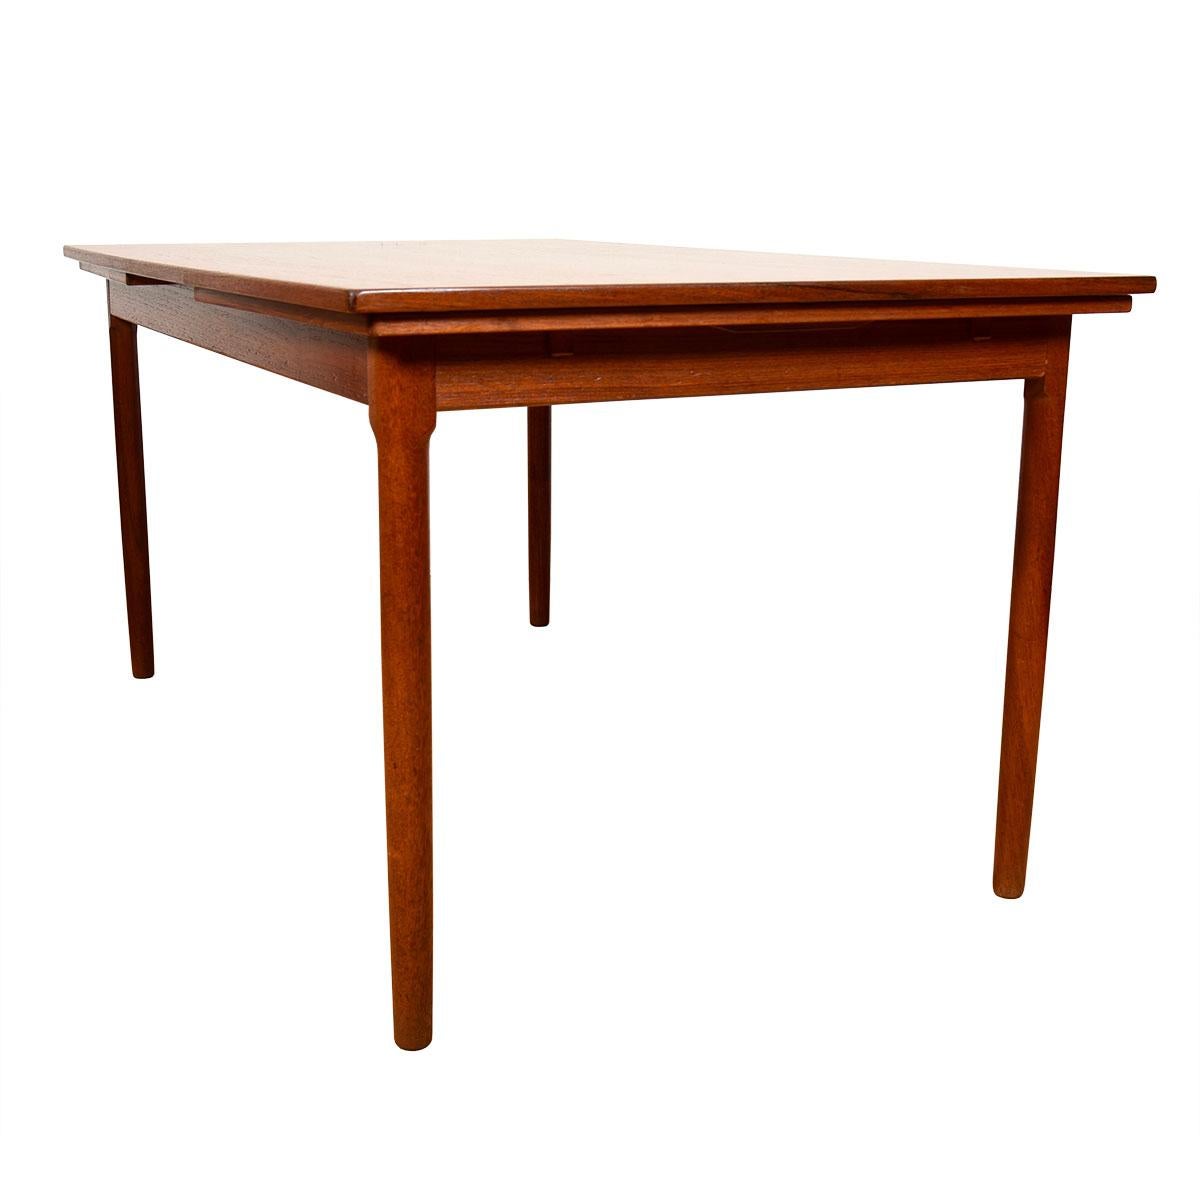 Expanding Danish Modern Teak Curved Dining Table

Additional information:
Material: Teak
Featured at DC:
Expanding Dining Table w/ A Wonderful Design Aesthetic.
The Ends Gently Taper In — Offering a Slight Oval Shape Allowing It To Be Space